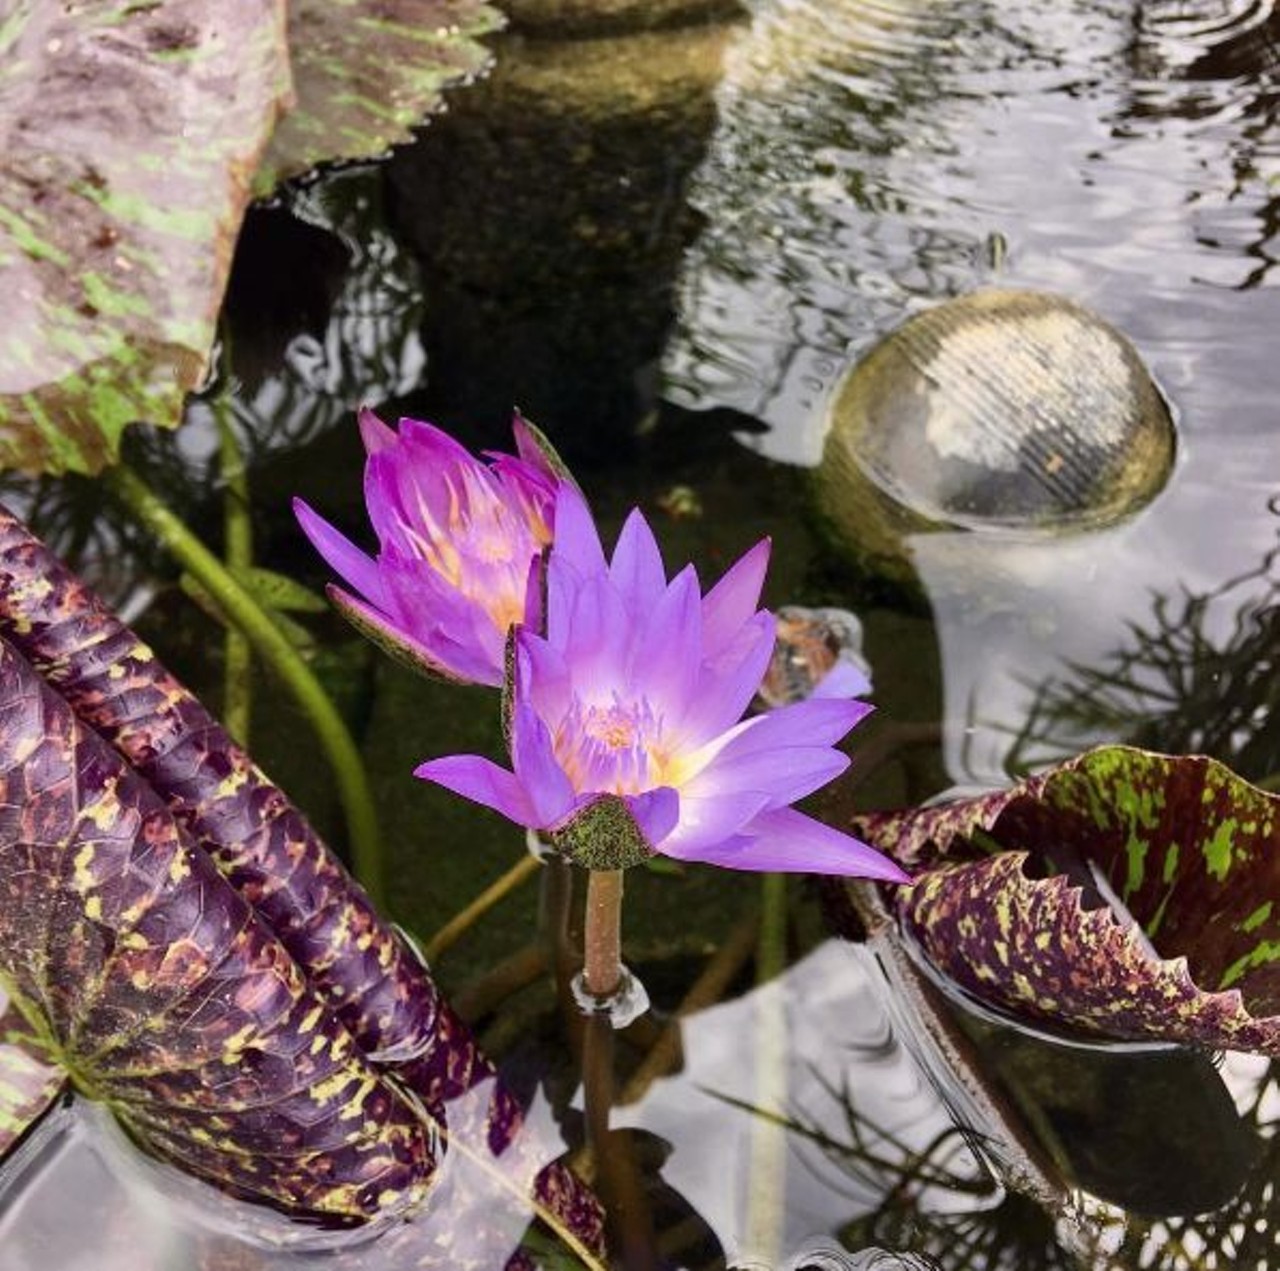 See what&#146;s blooming at the Botanical Garden
555 Funston Pl, (210) 207-3250, sabot.org
What better time of year to admire the garden than spring?
Photo via Instagram, sethrho